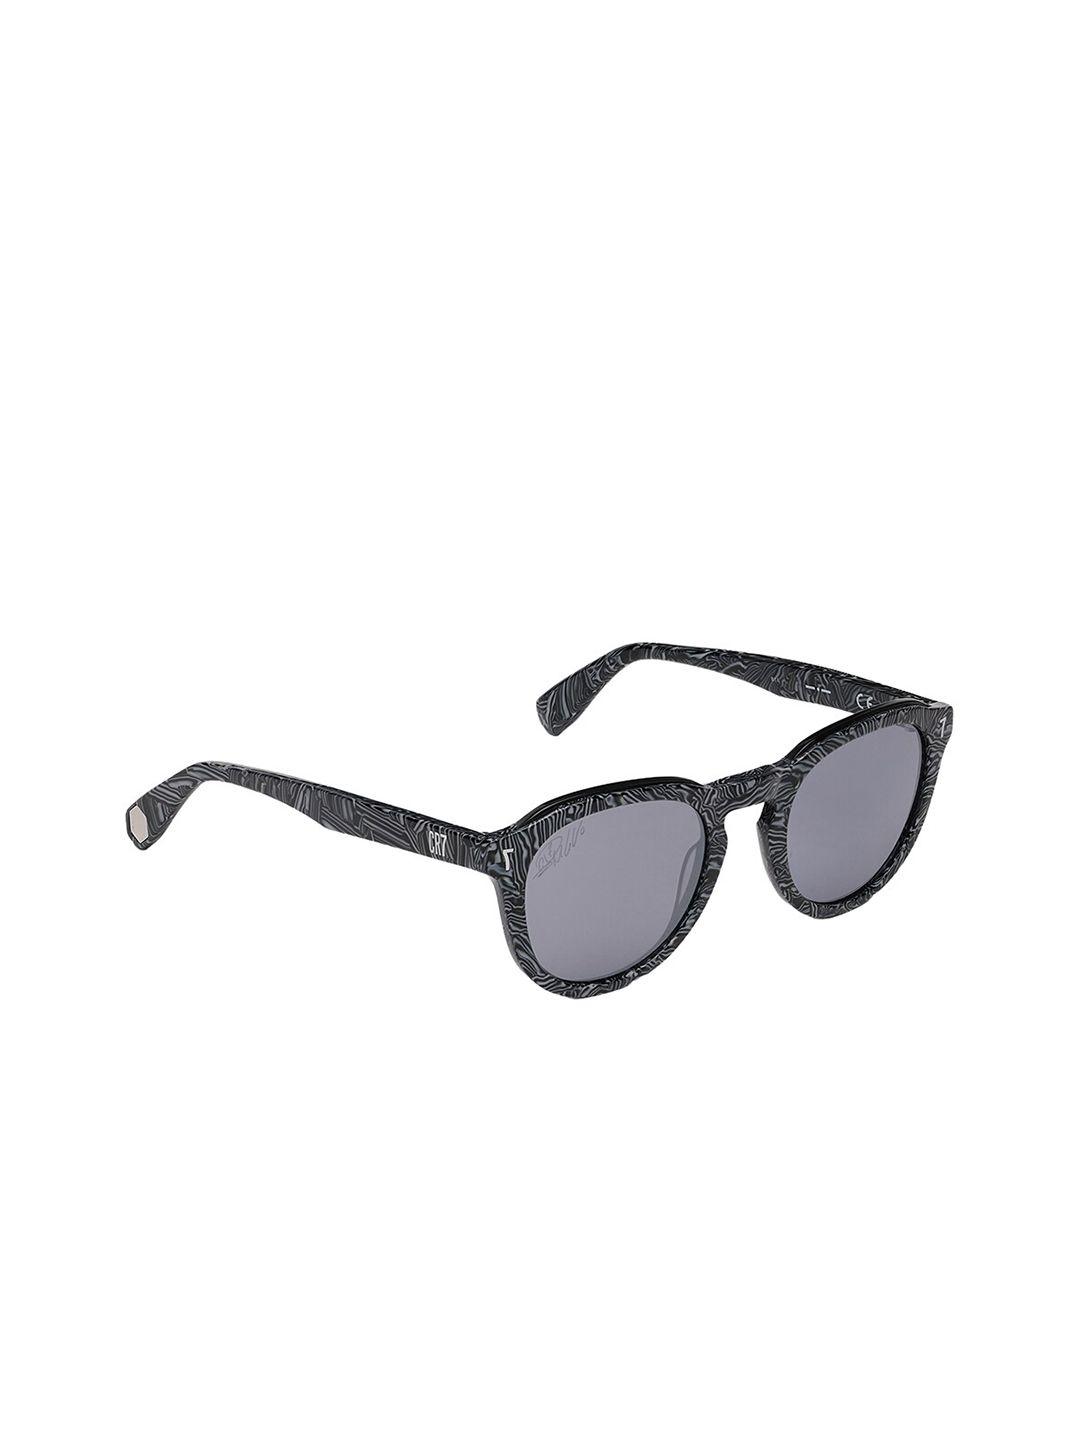 cr7 men round sunglasses with uv protected lens